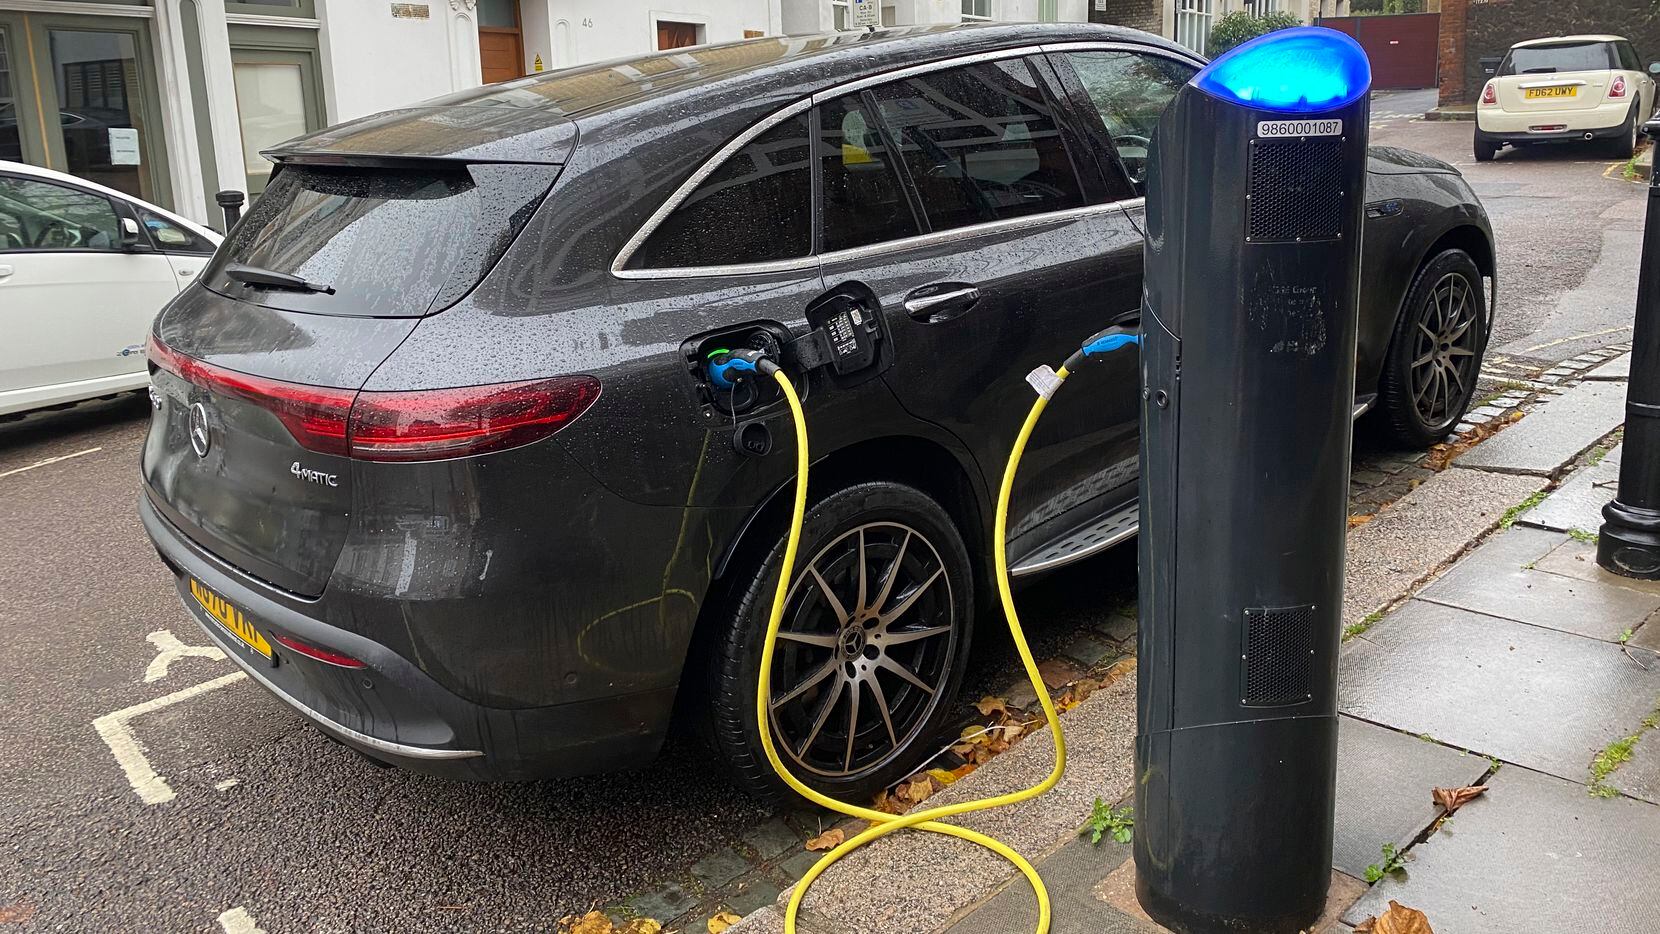 An electric vehicle charges at a public fast-charging station in London on Oct. 20, 2022....